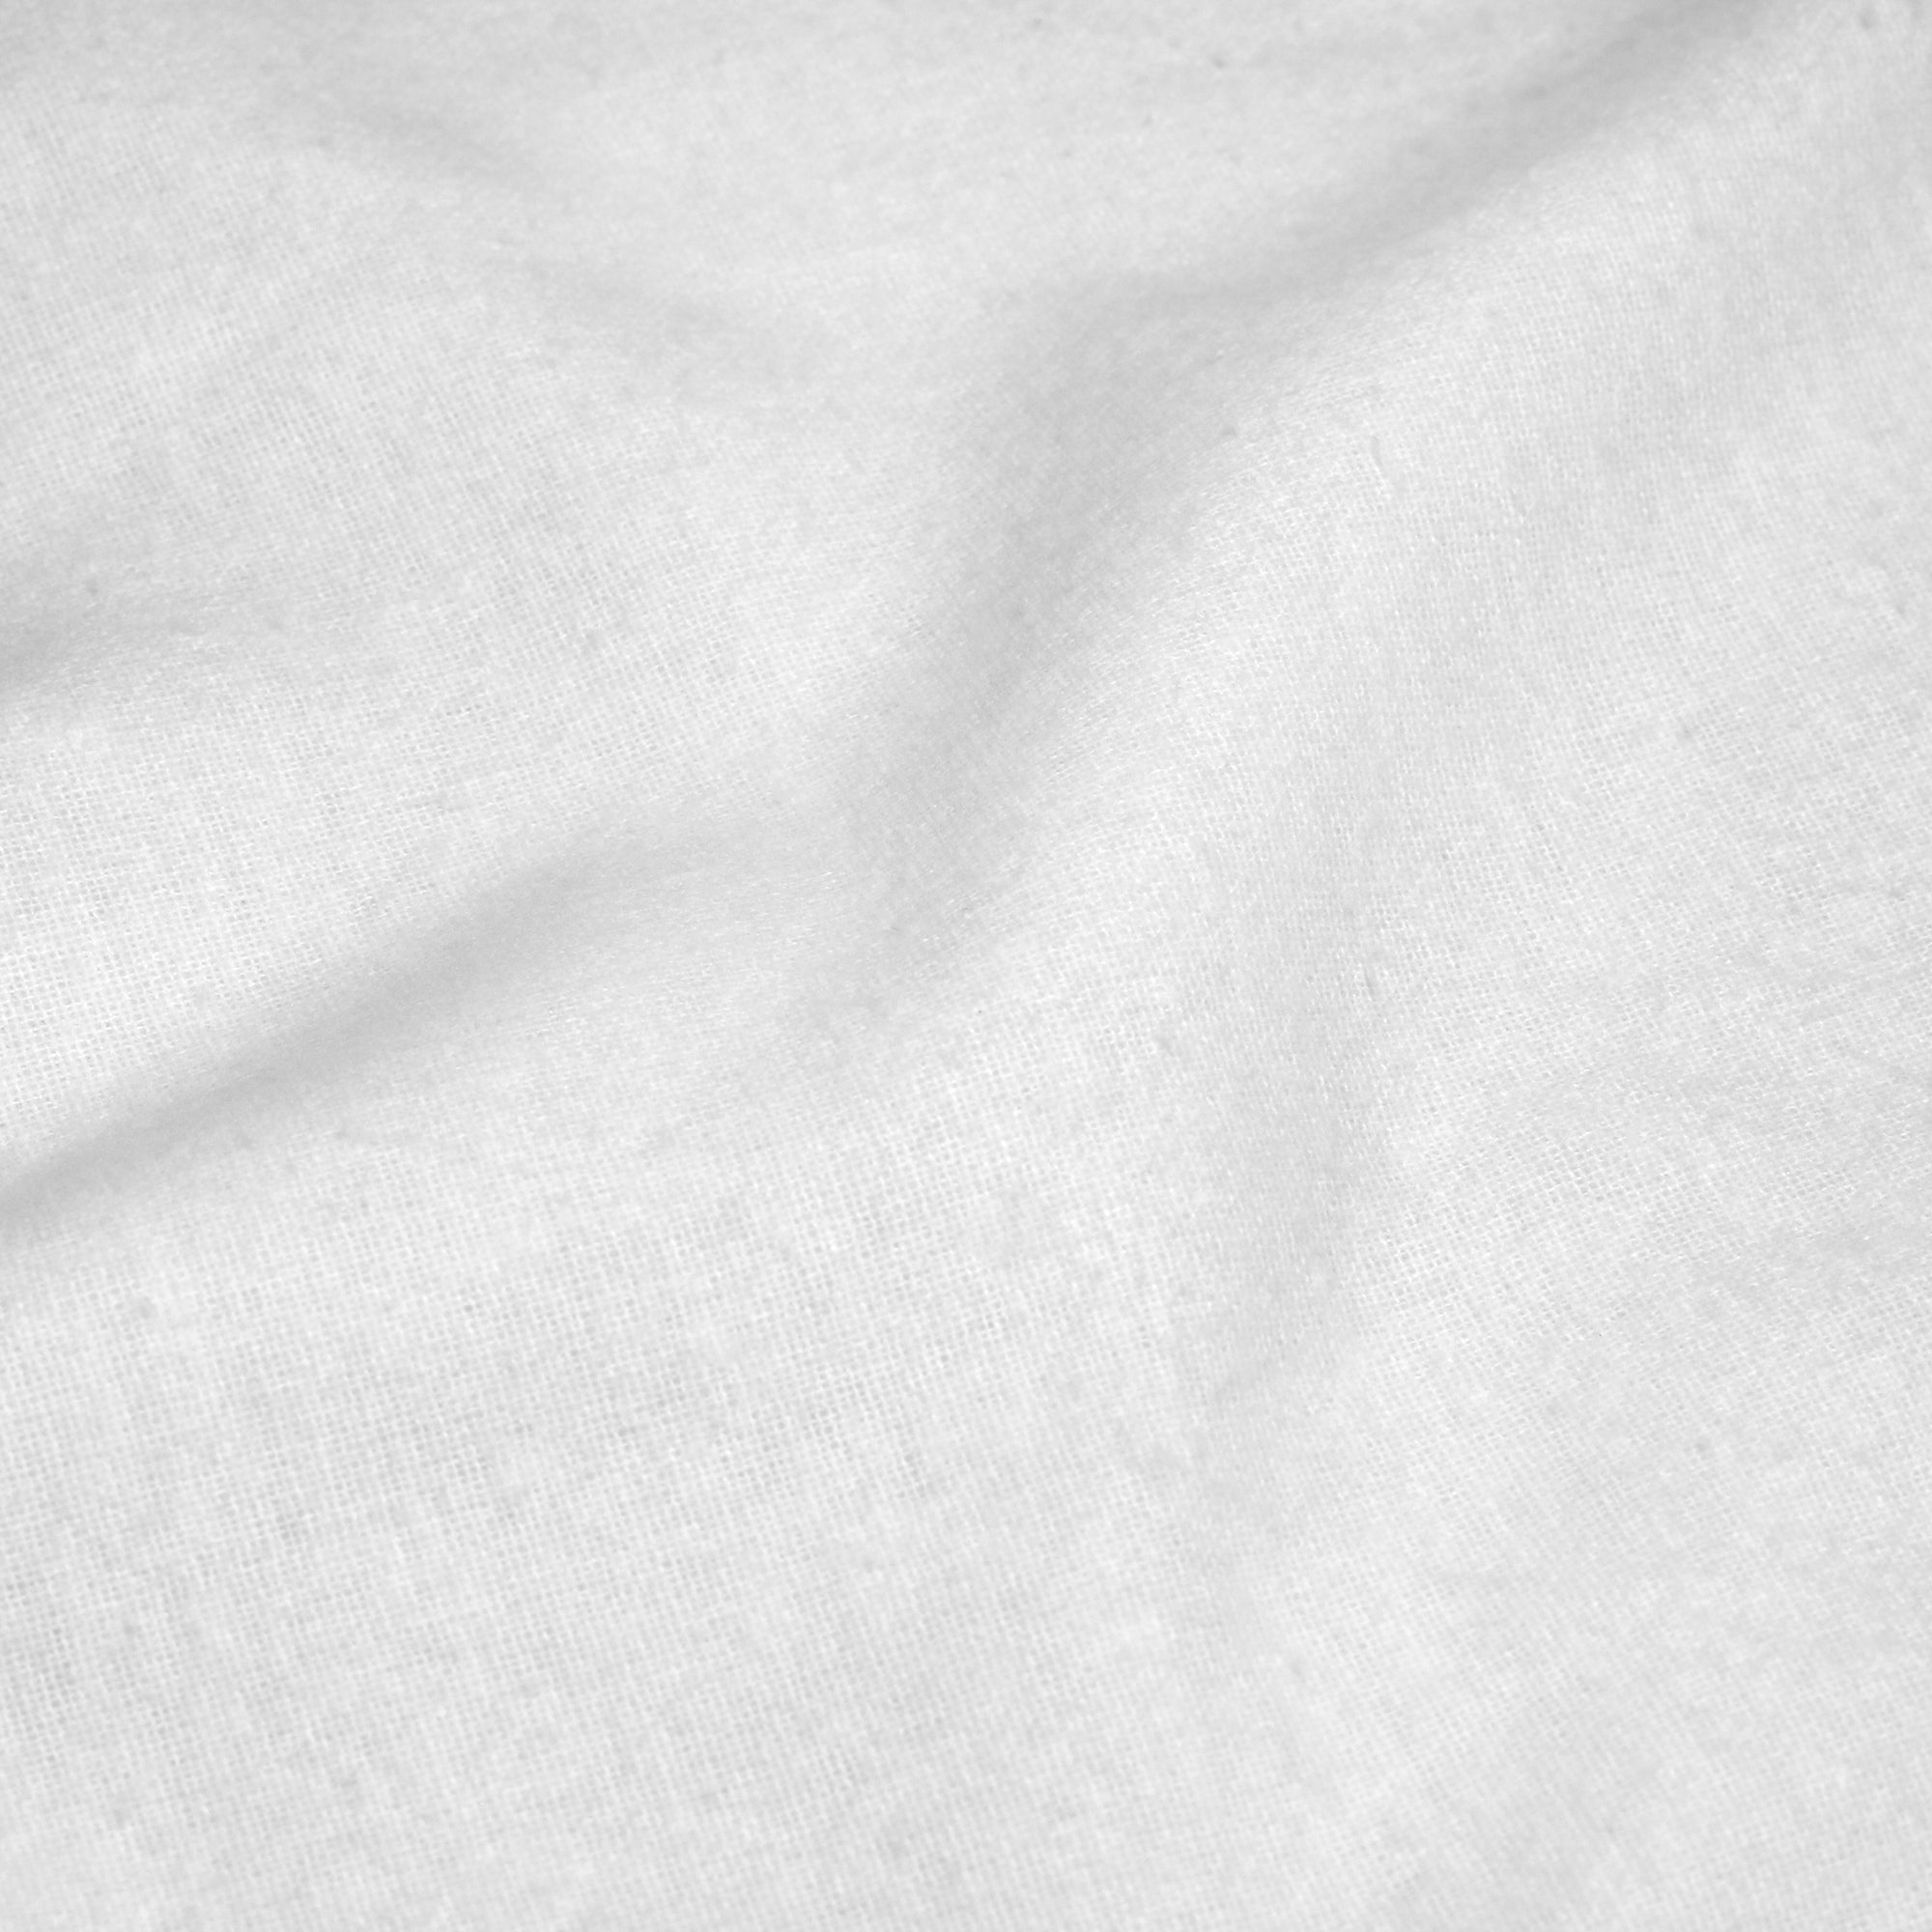 Brushed Bedding -  28cm Fitted Sheet and Optional Pillowcases - in White by Fusion